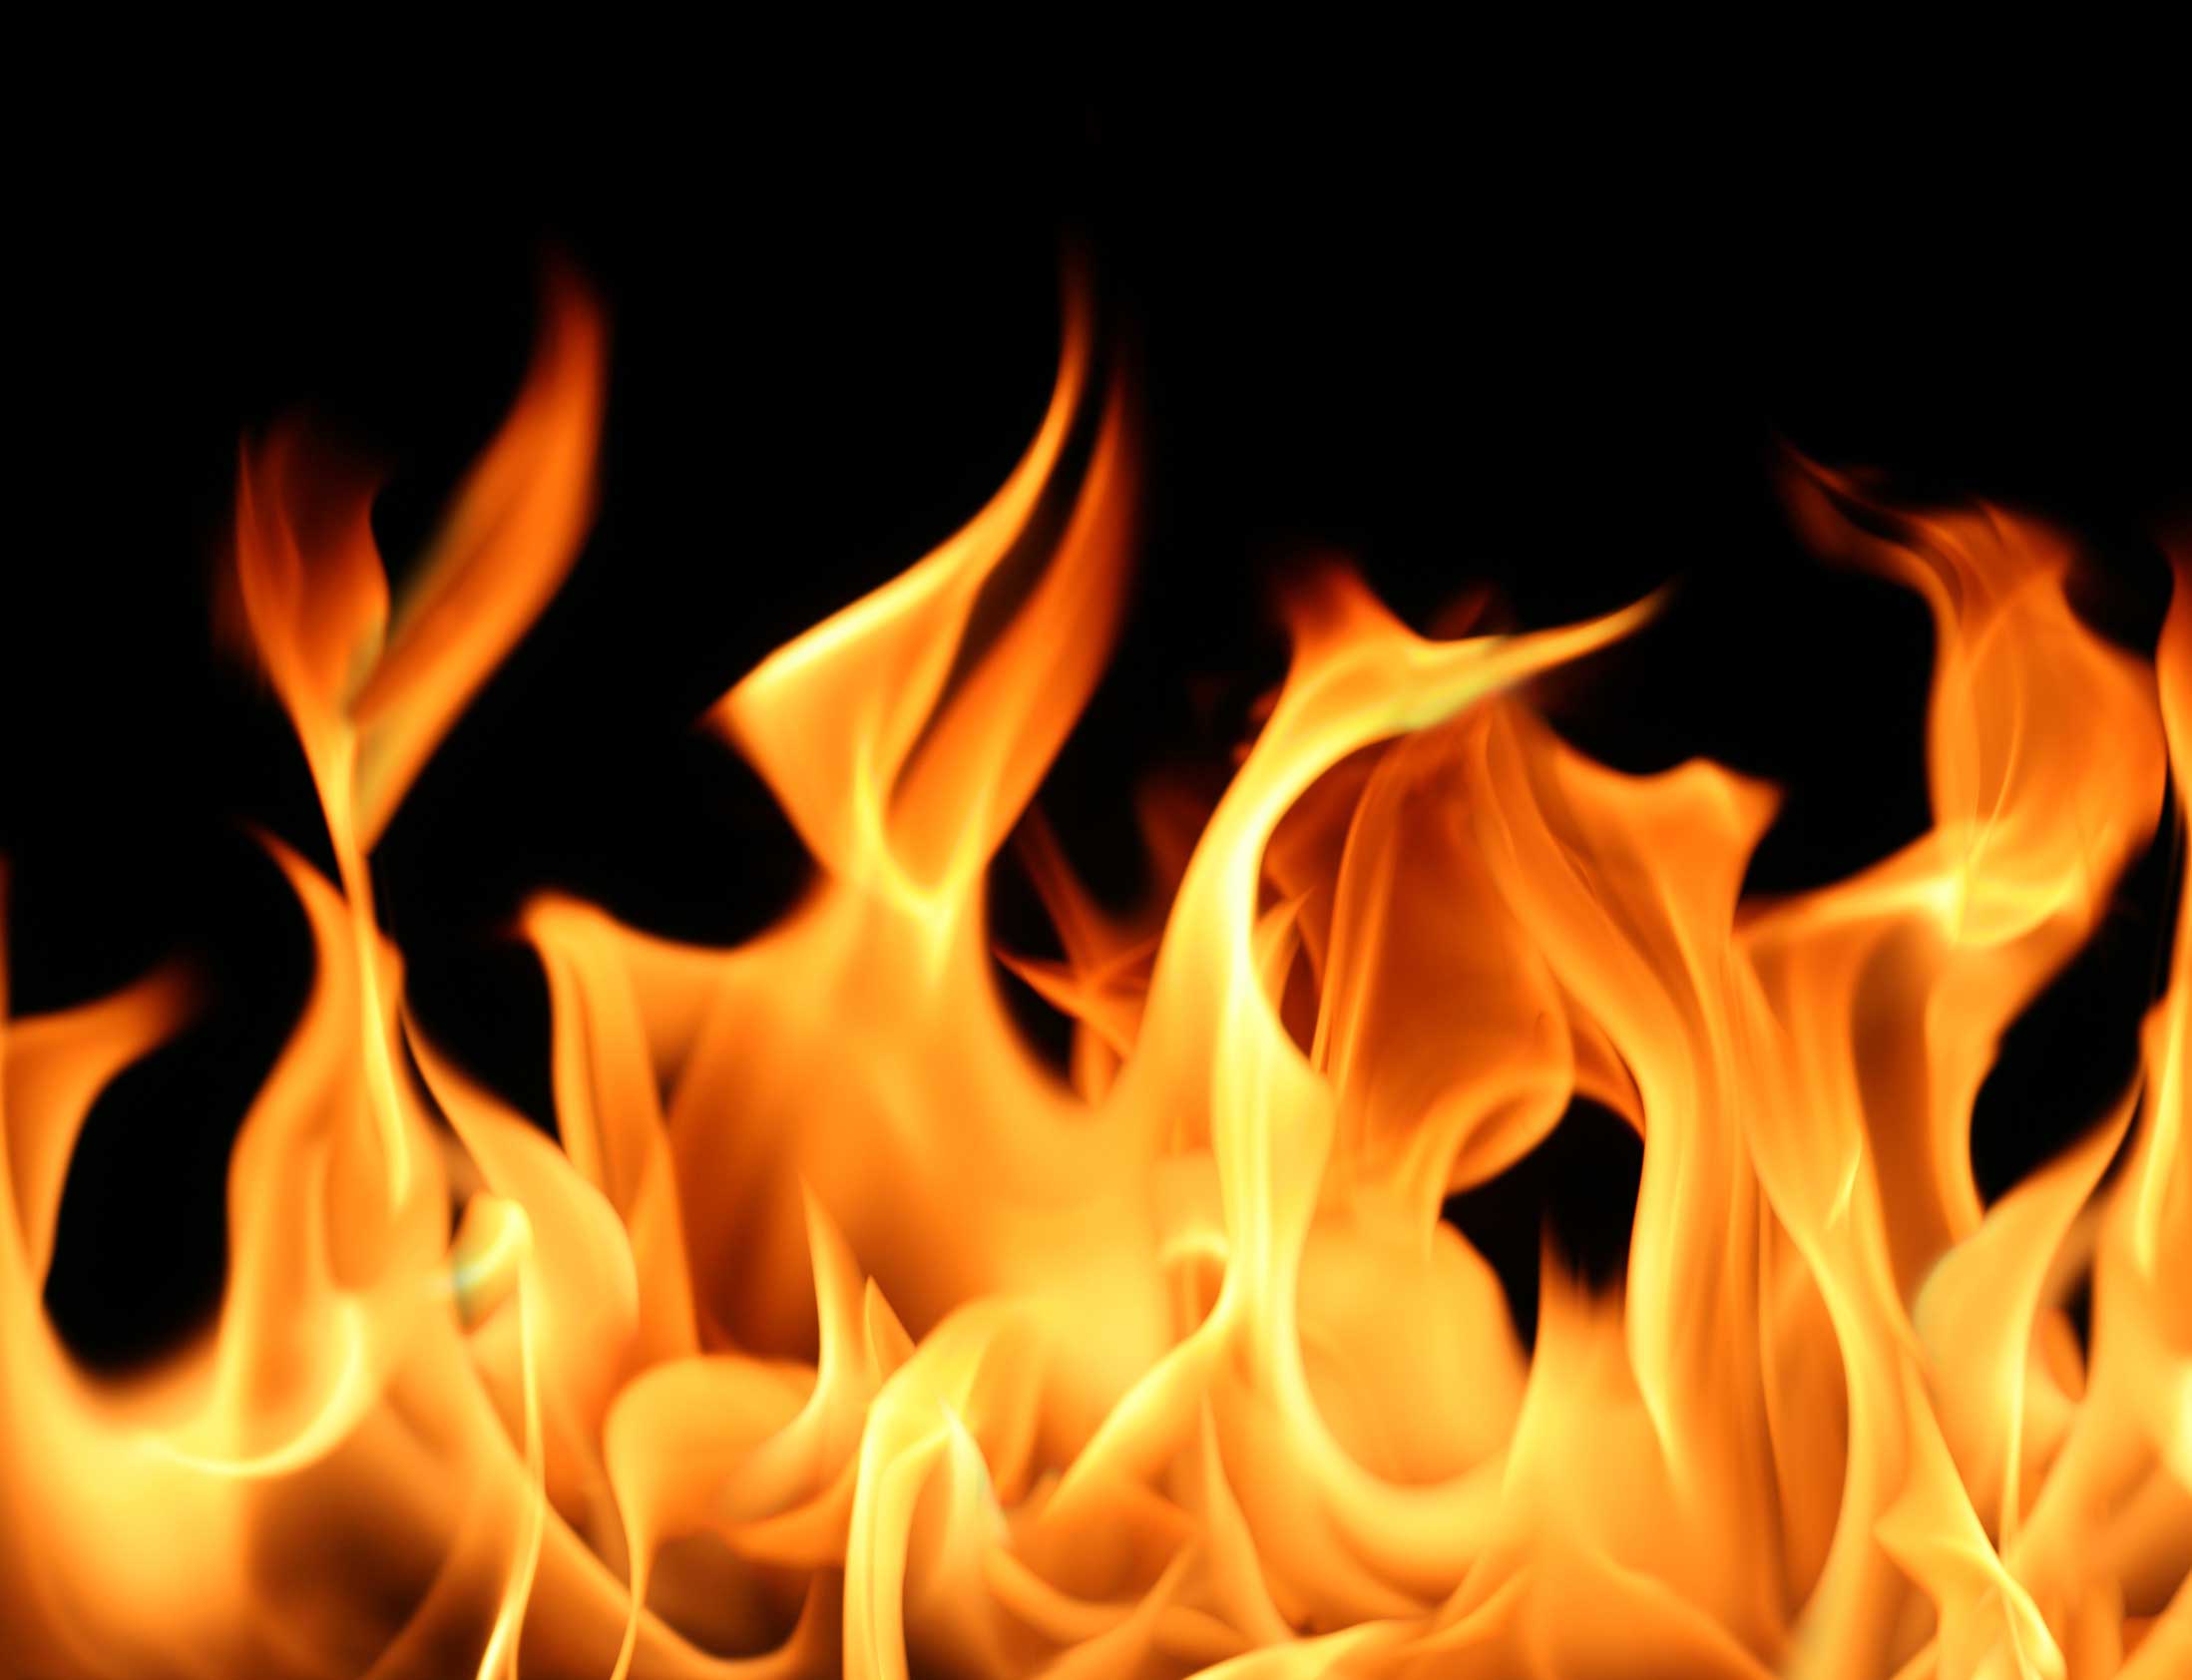 Cocount factory in Minuwangoda engulfed in flames 